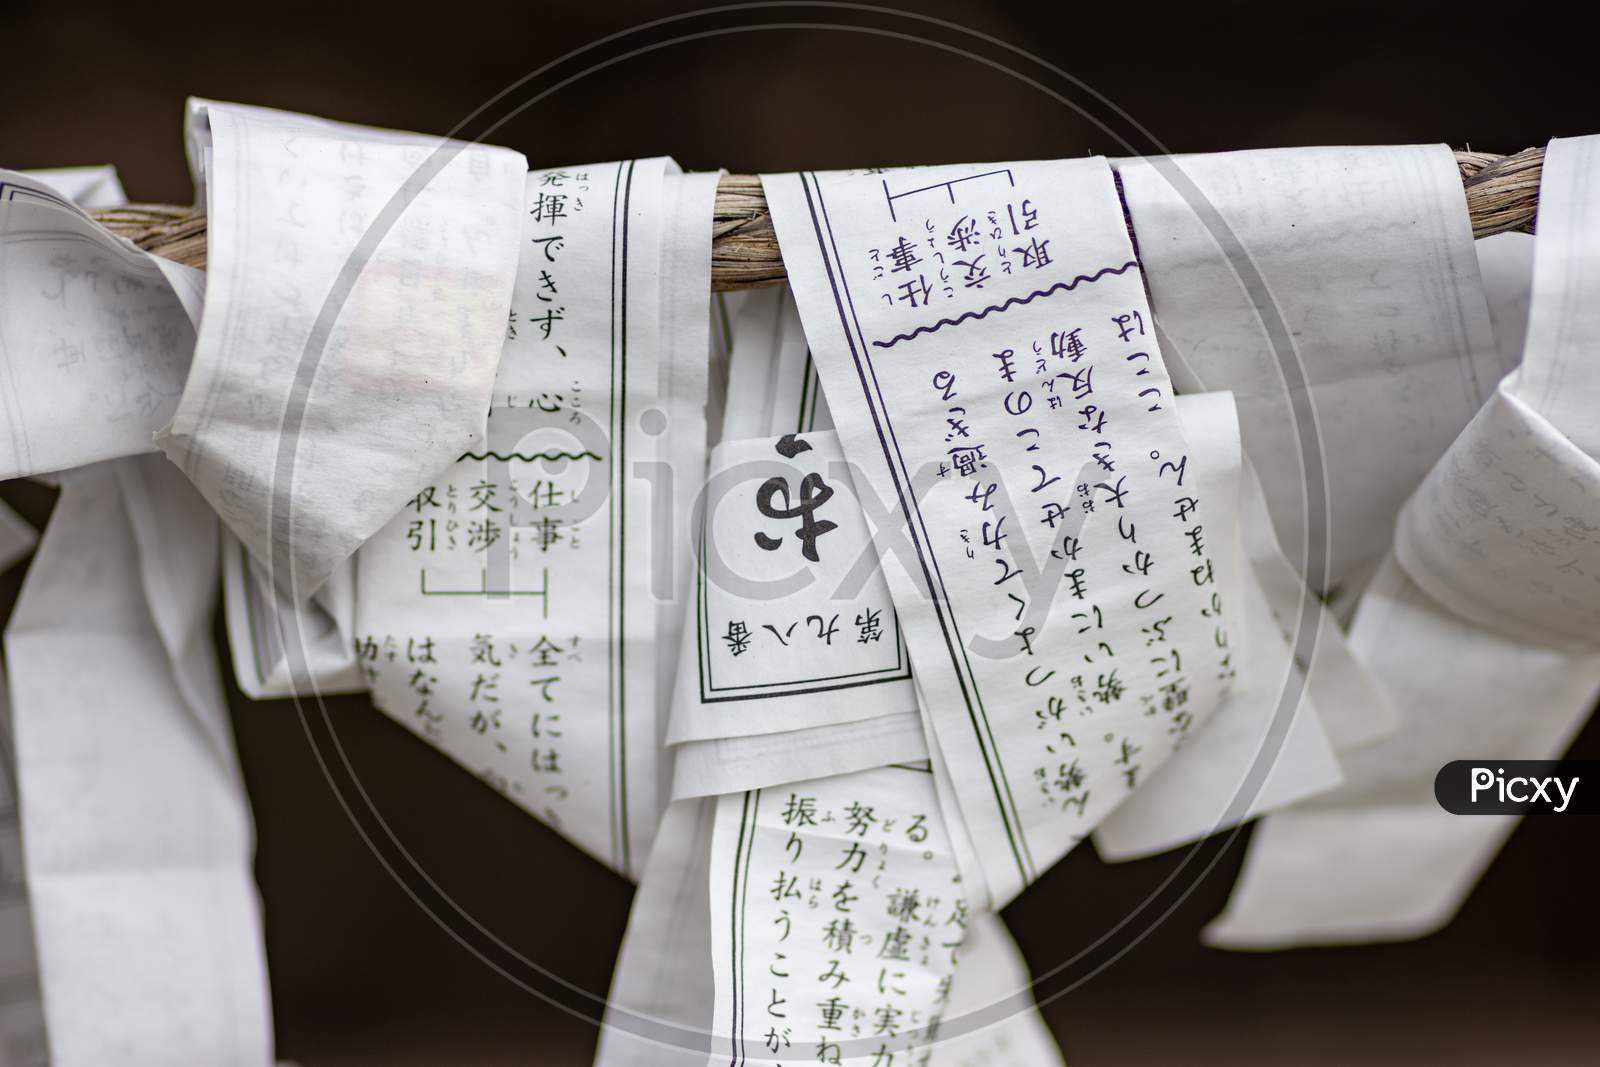 Omikuji Fortunes Written On Strips Of Paper At Buddhist Temple In Nara, Japan